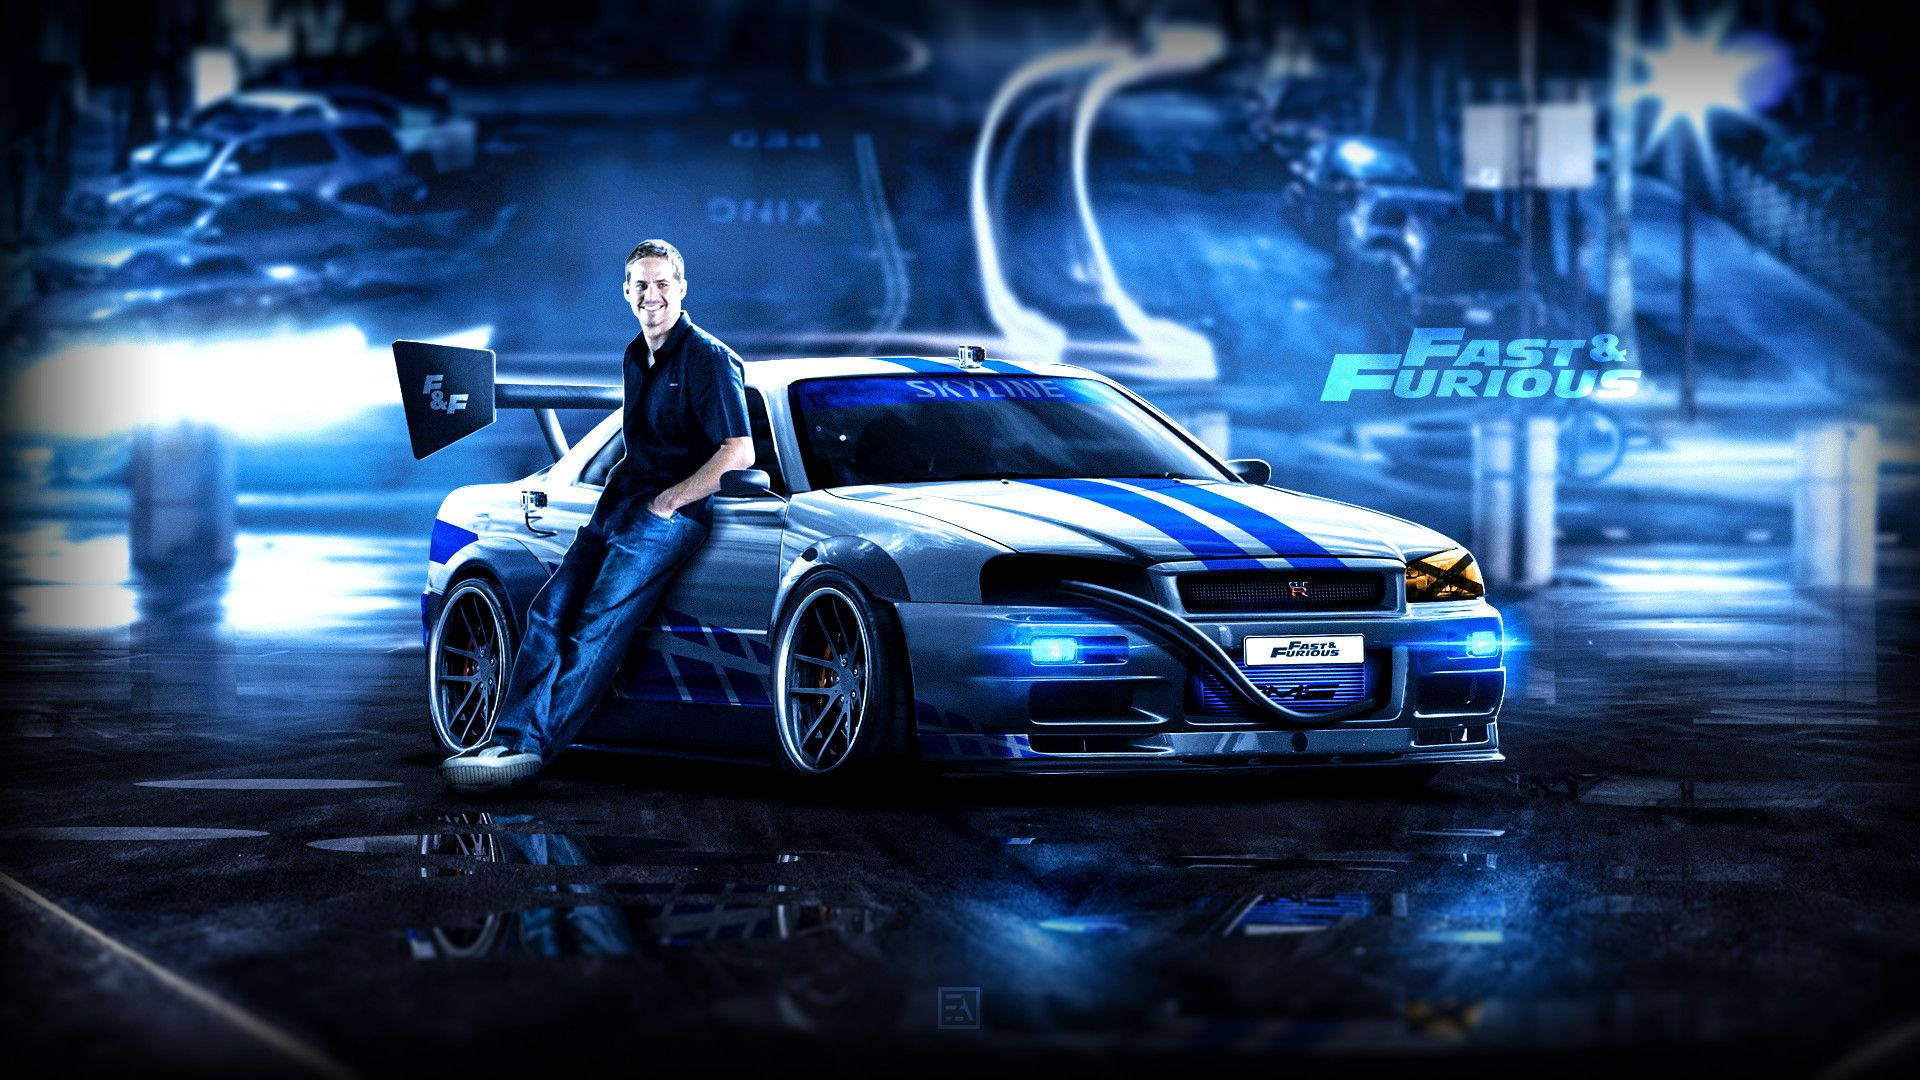 Paul Walker proudly showing off his car Wallpaper